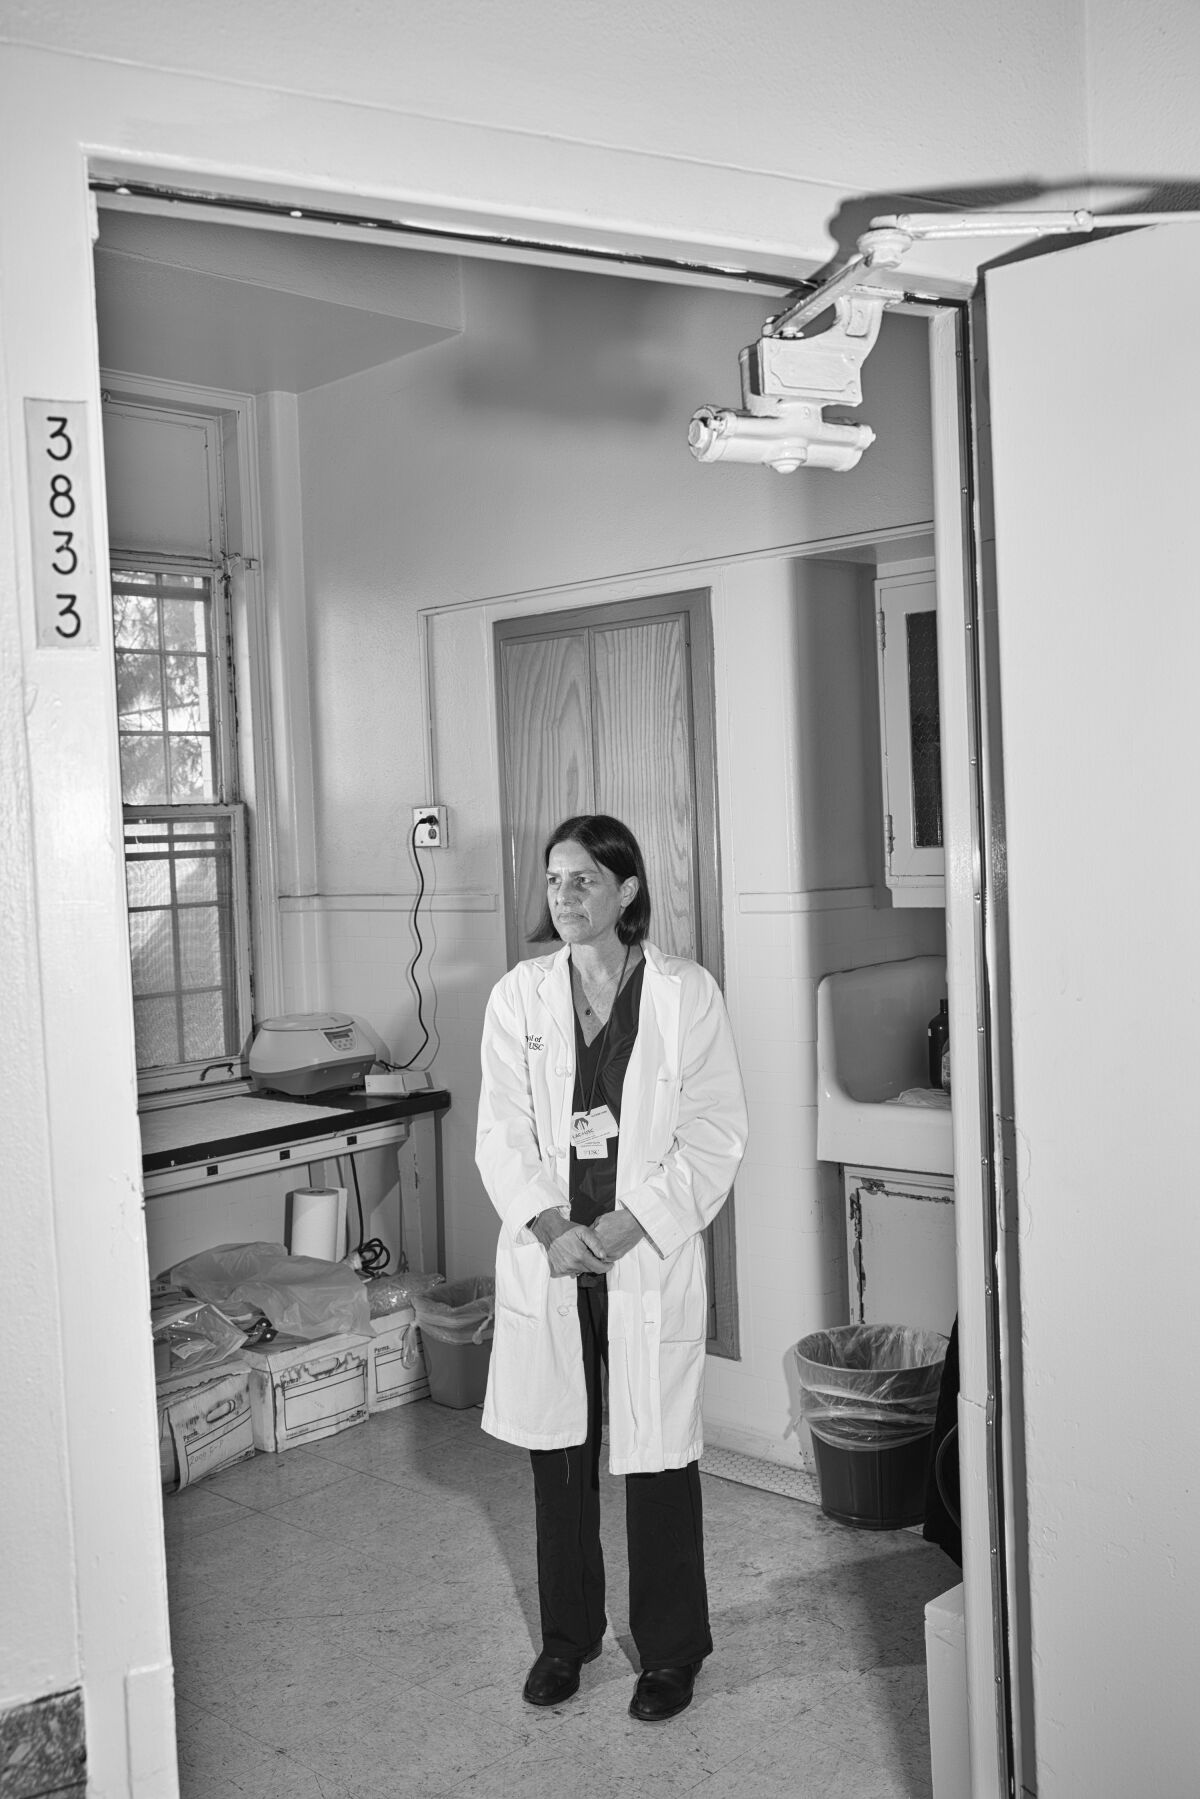 A researcher in a lab coat stands in her lab.